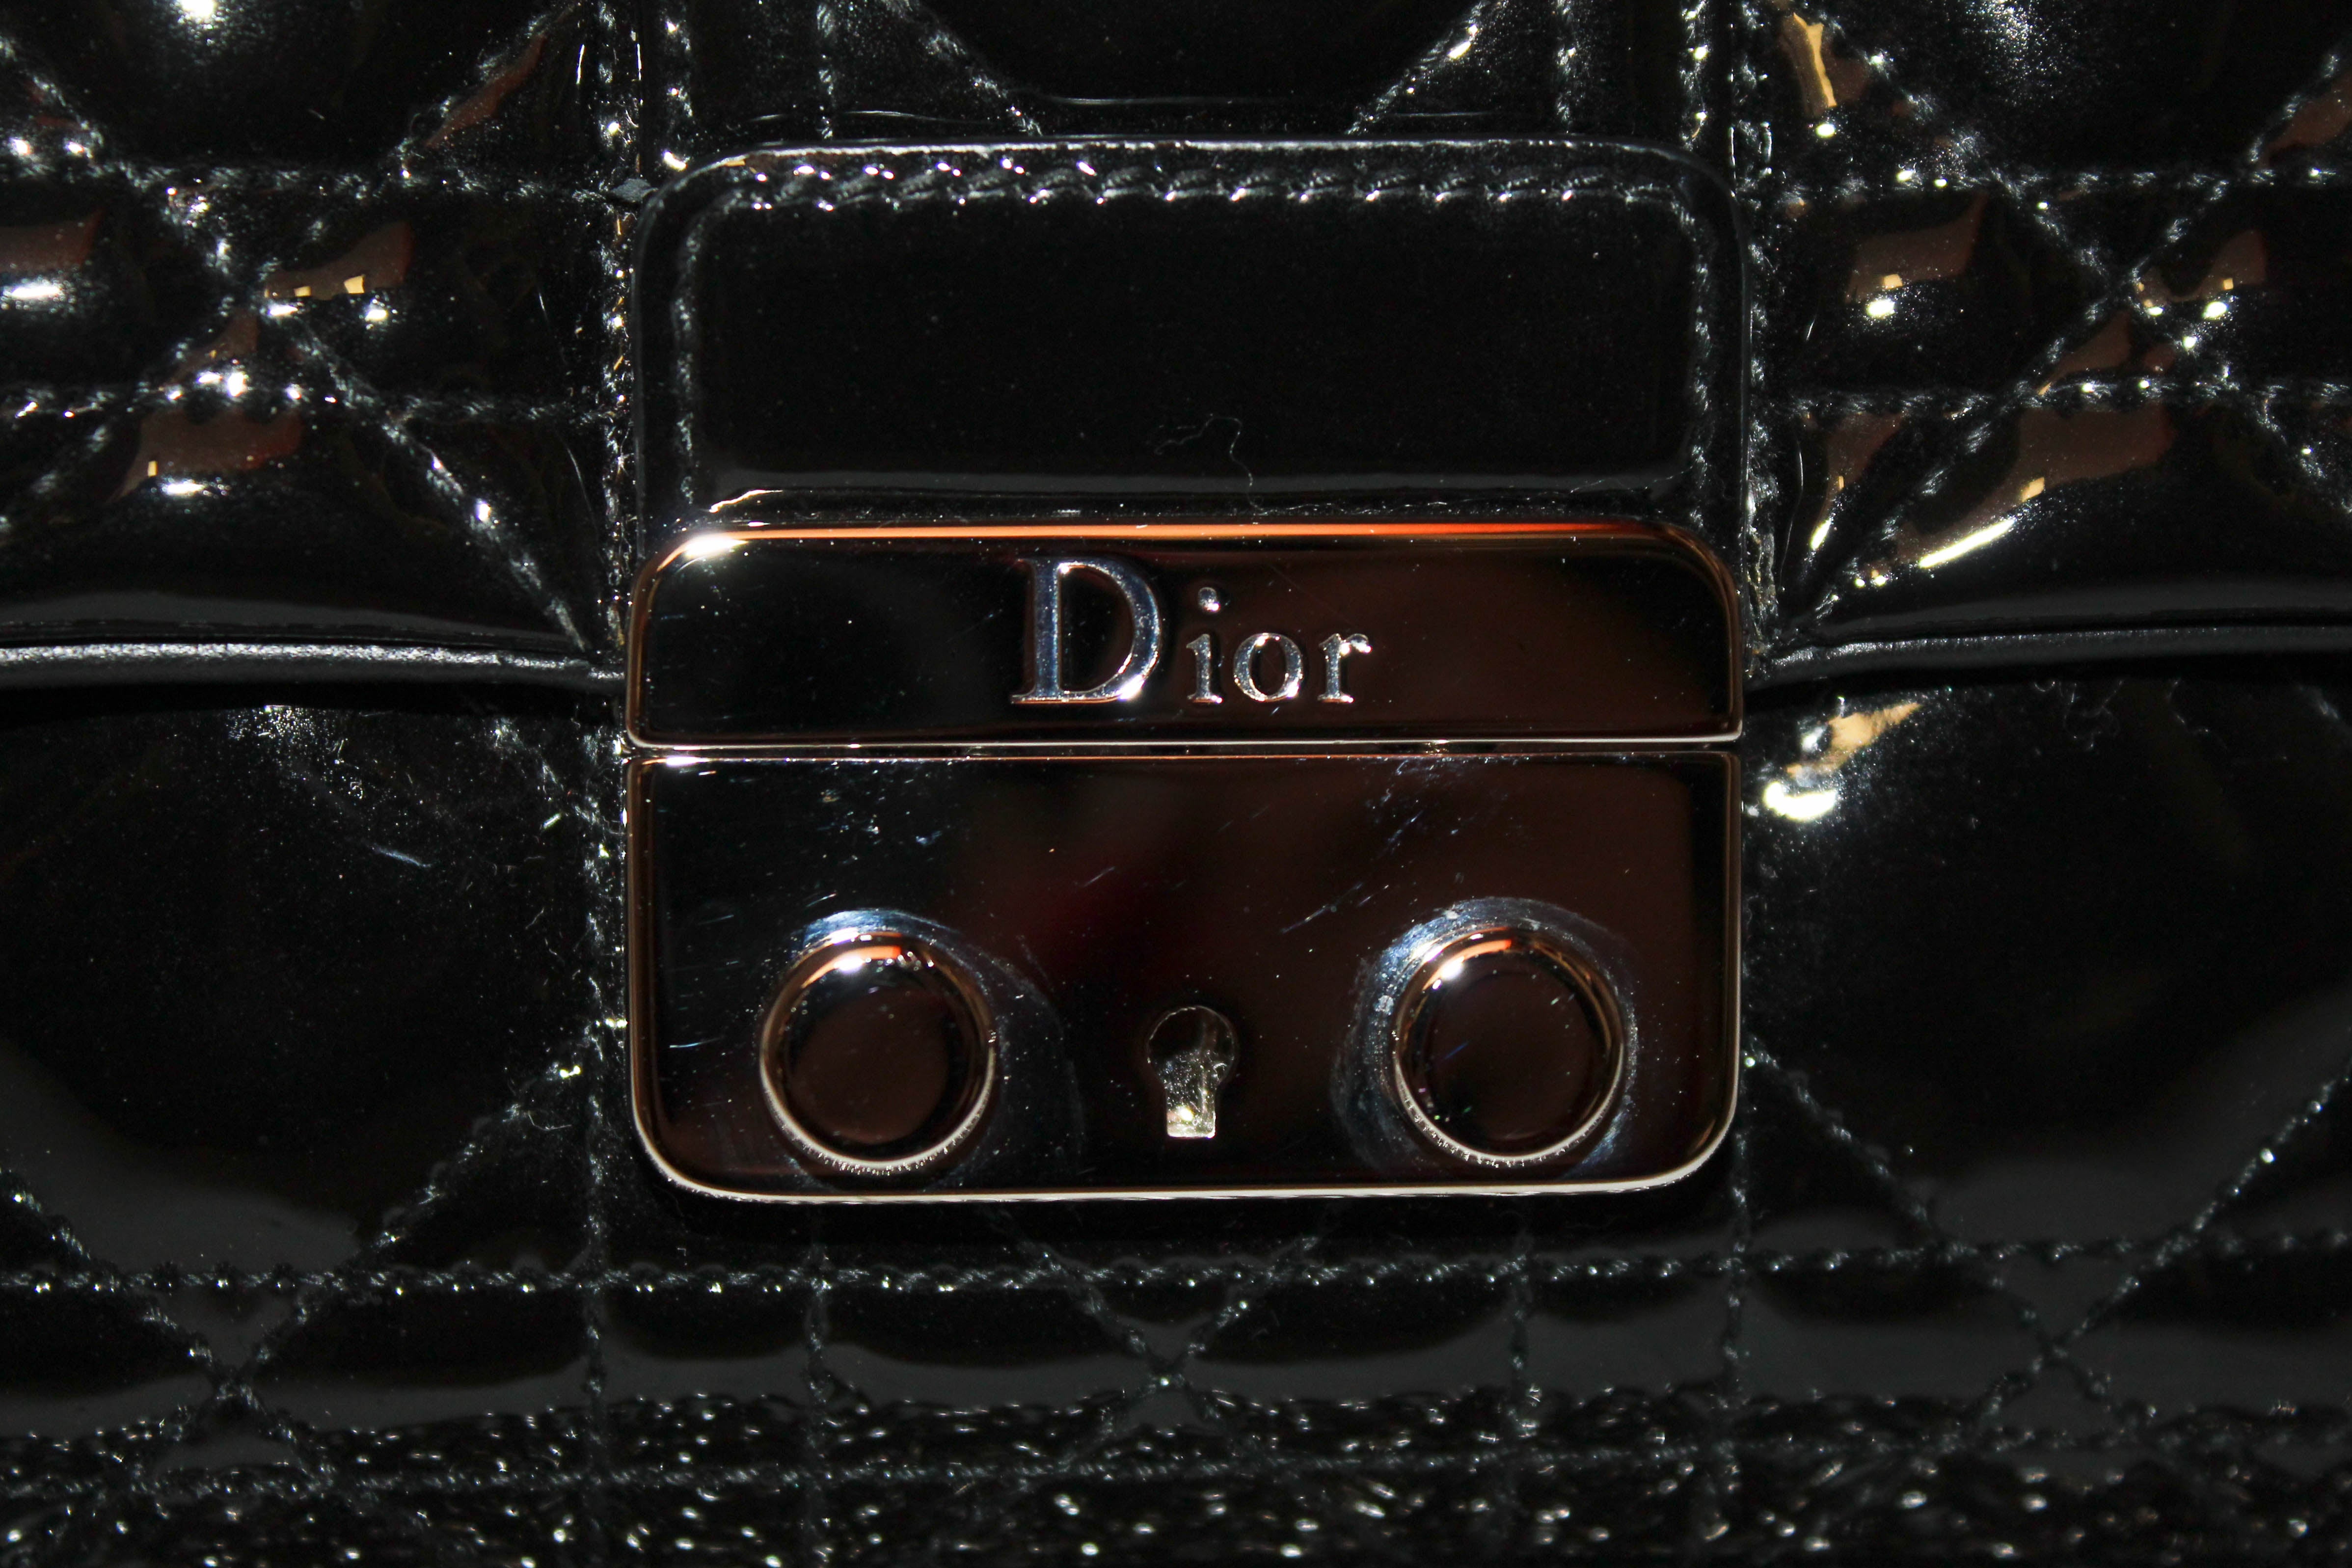 Authentic Christian Dior Black Cannage Patent Leather Miss Dior Promenade Pouch/Wallet On Chain